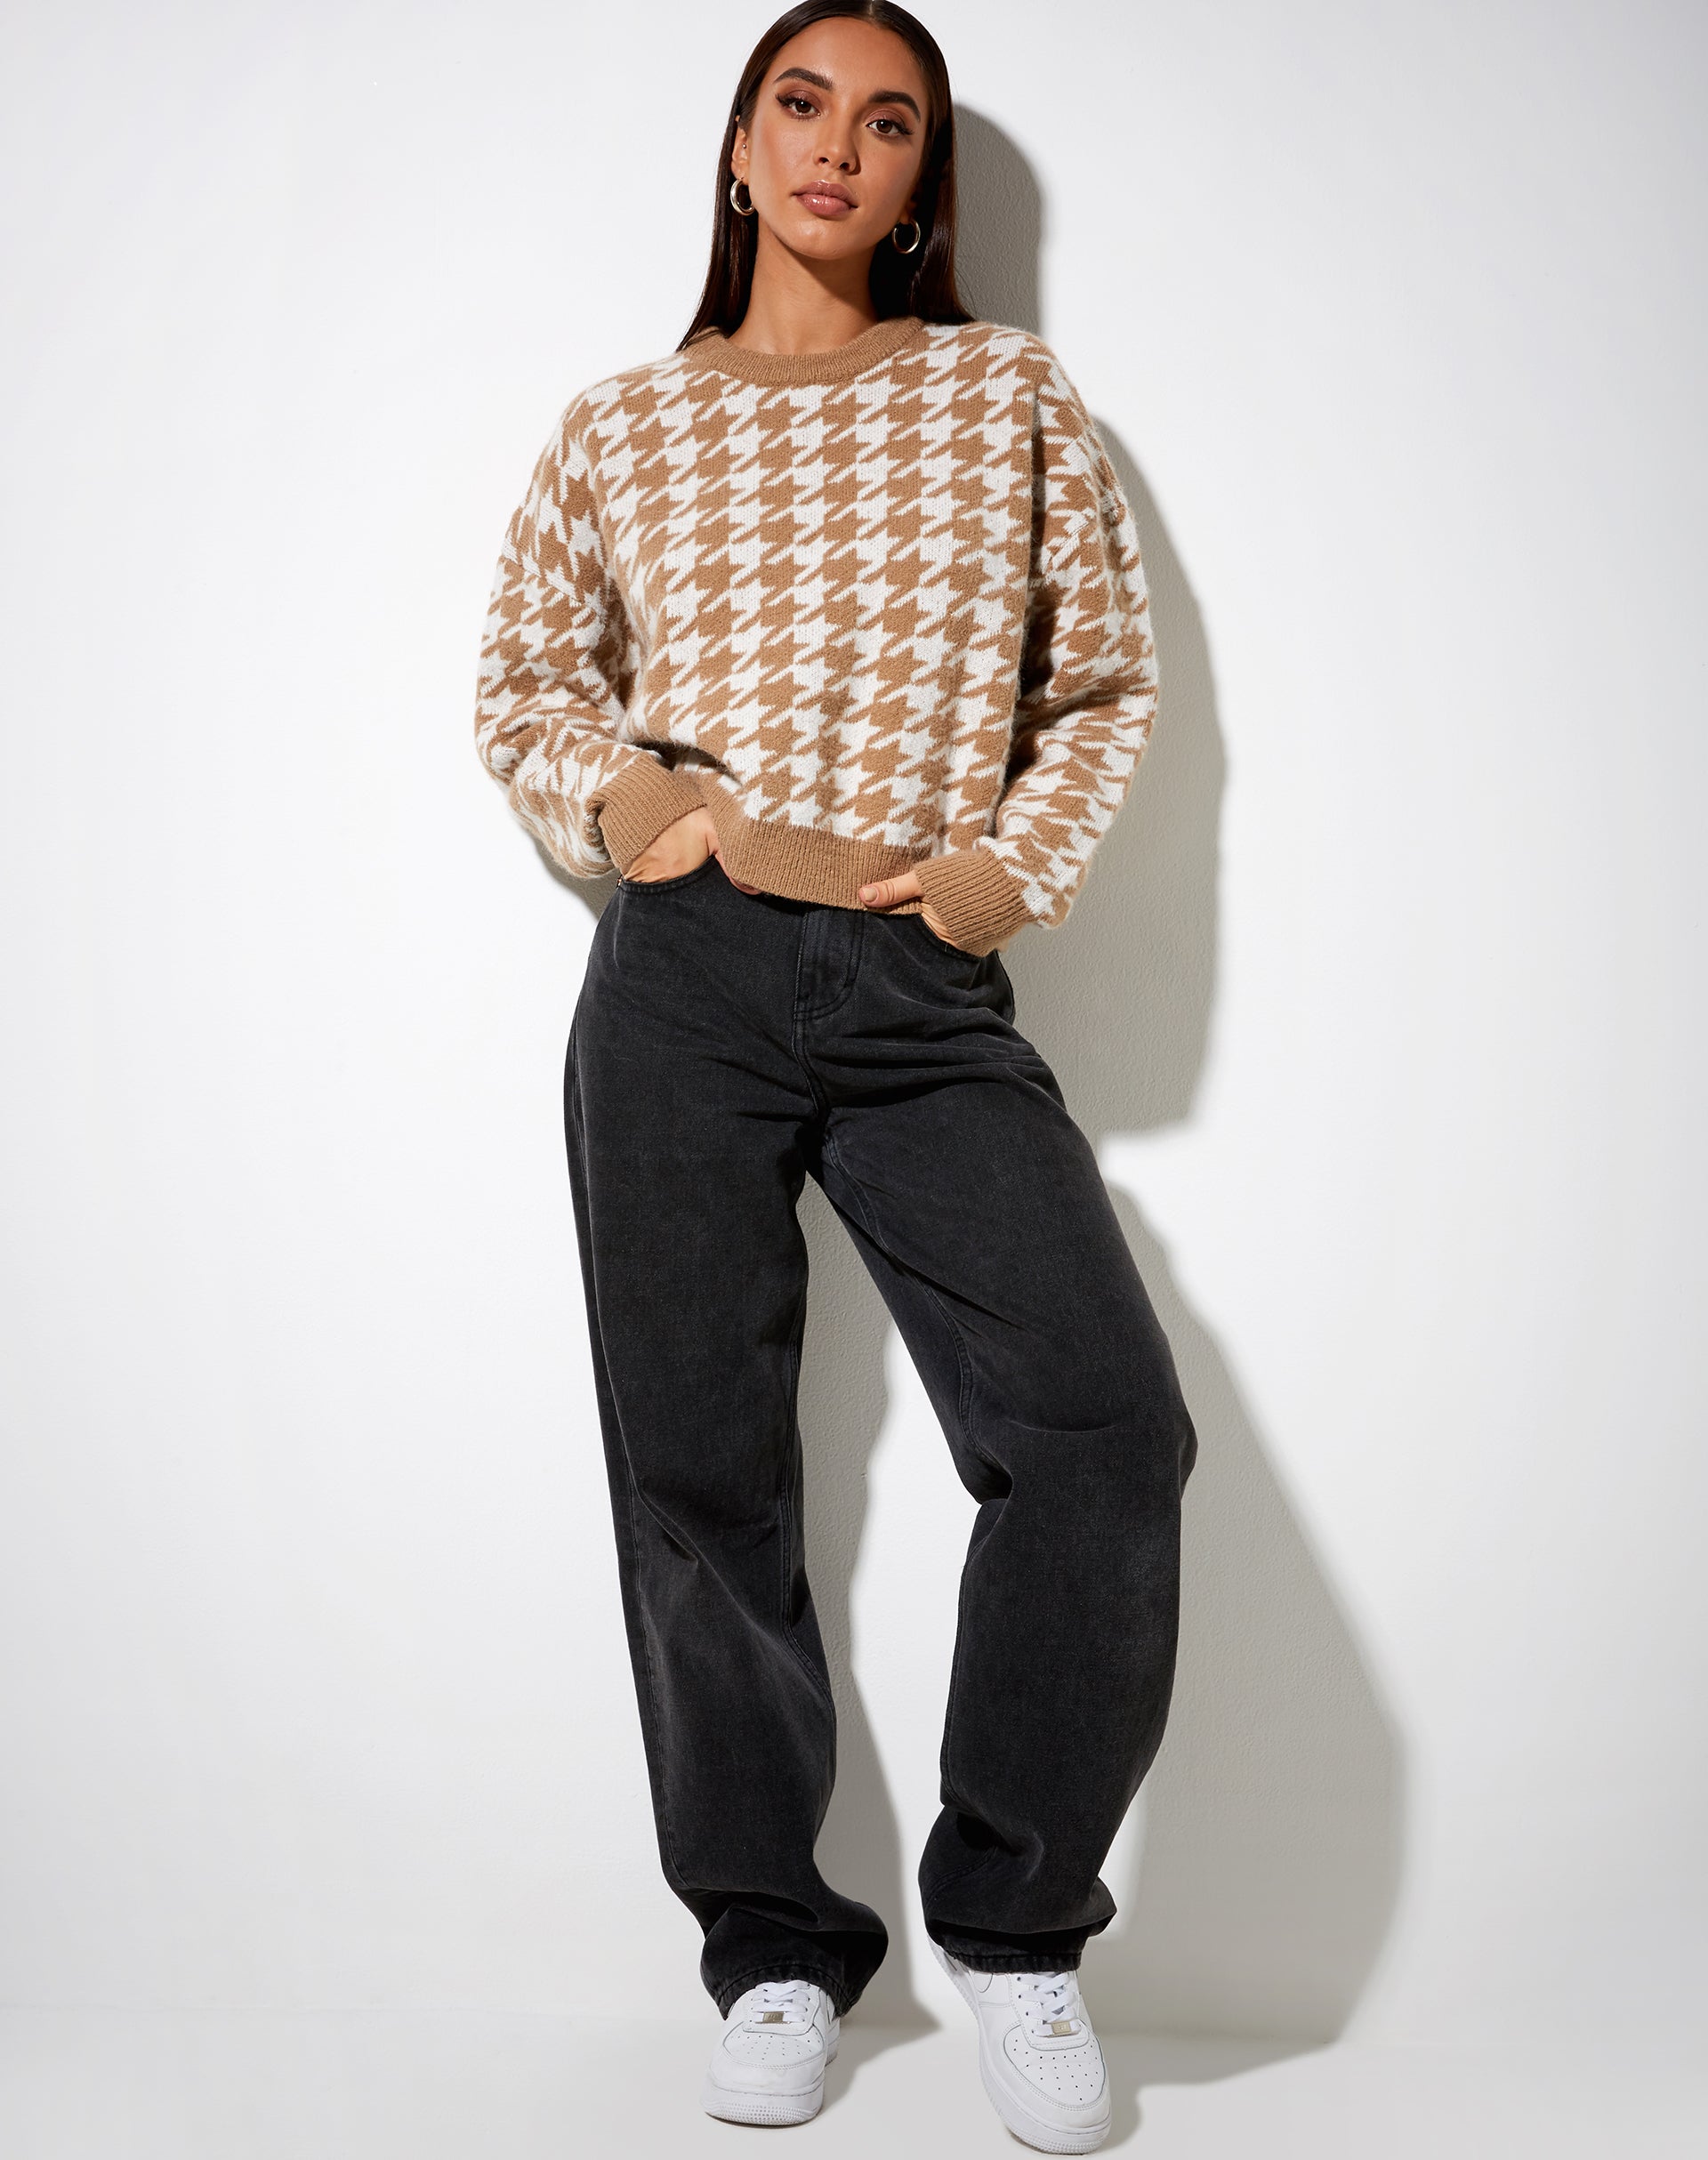 Image of Margo Jumper in Knit Houndstooth Brown